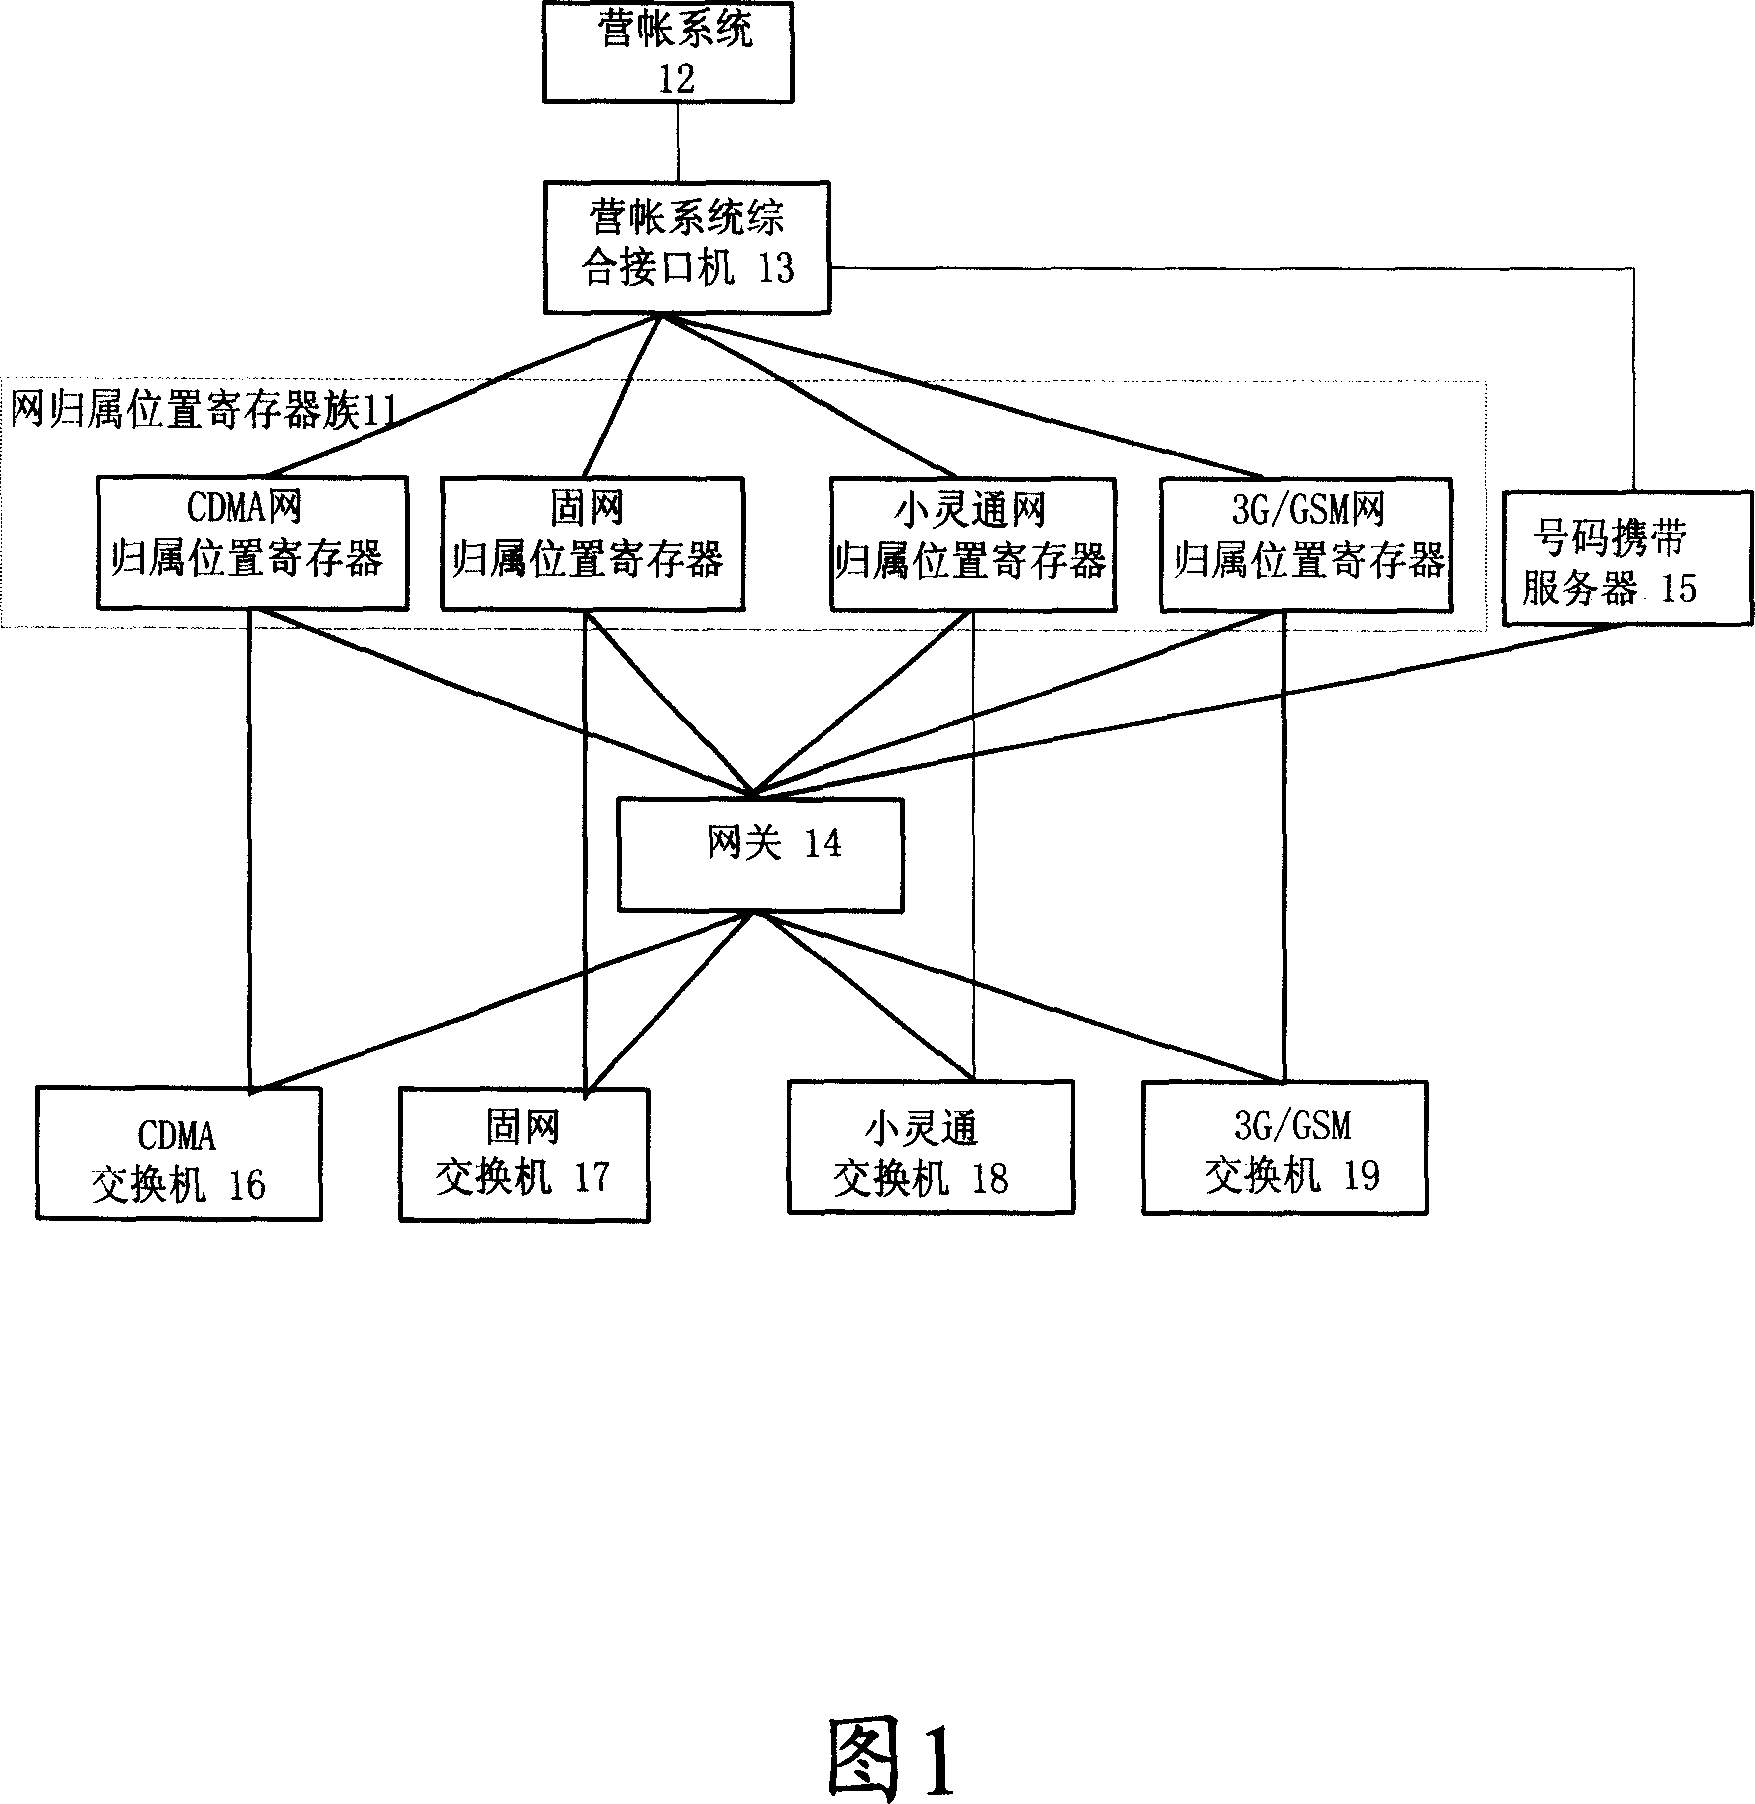 Apparatus and method for realizing number portability between multi-type networks